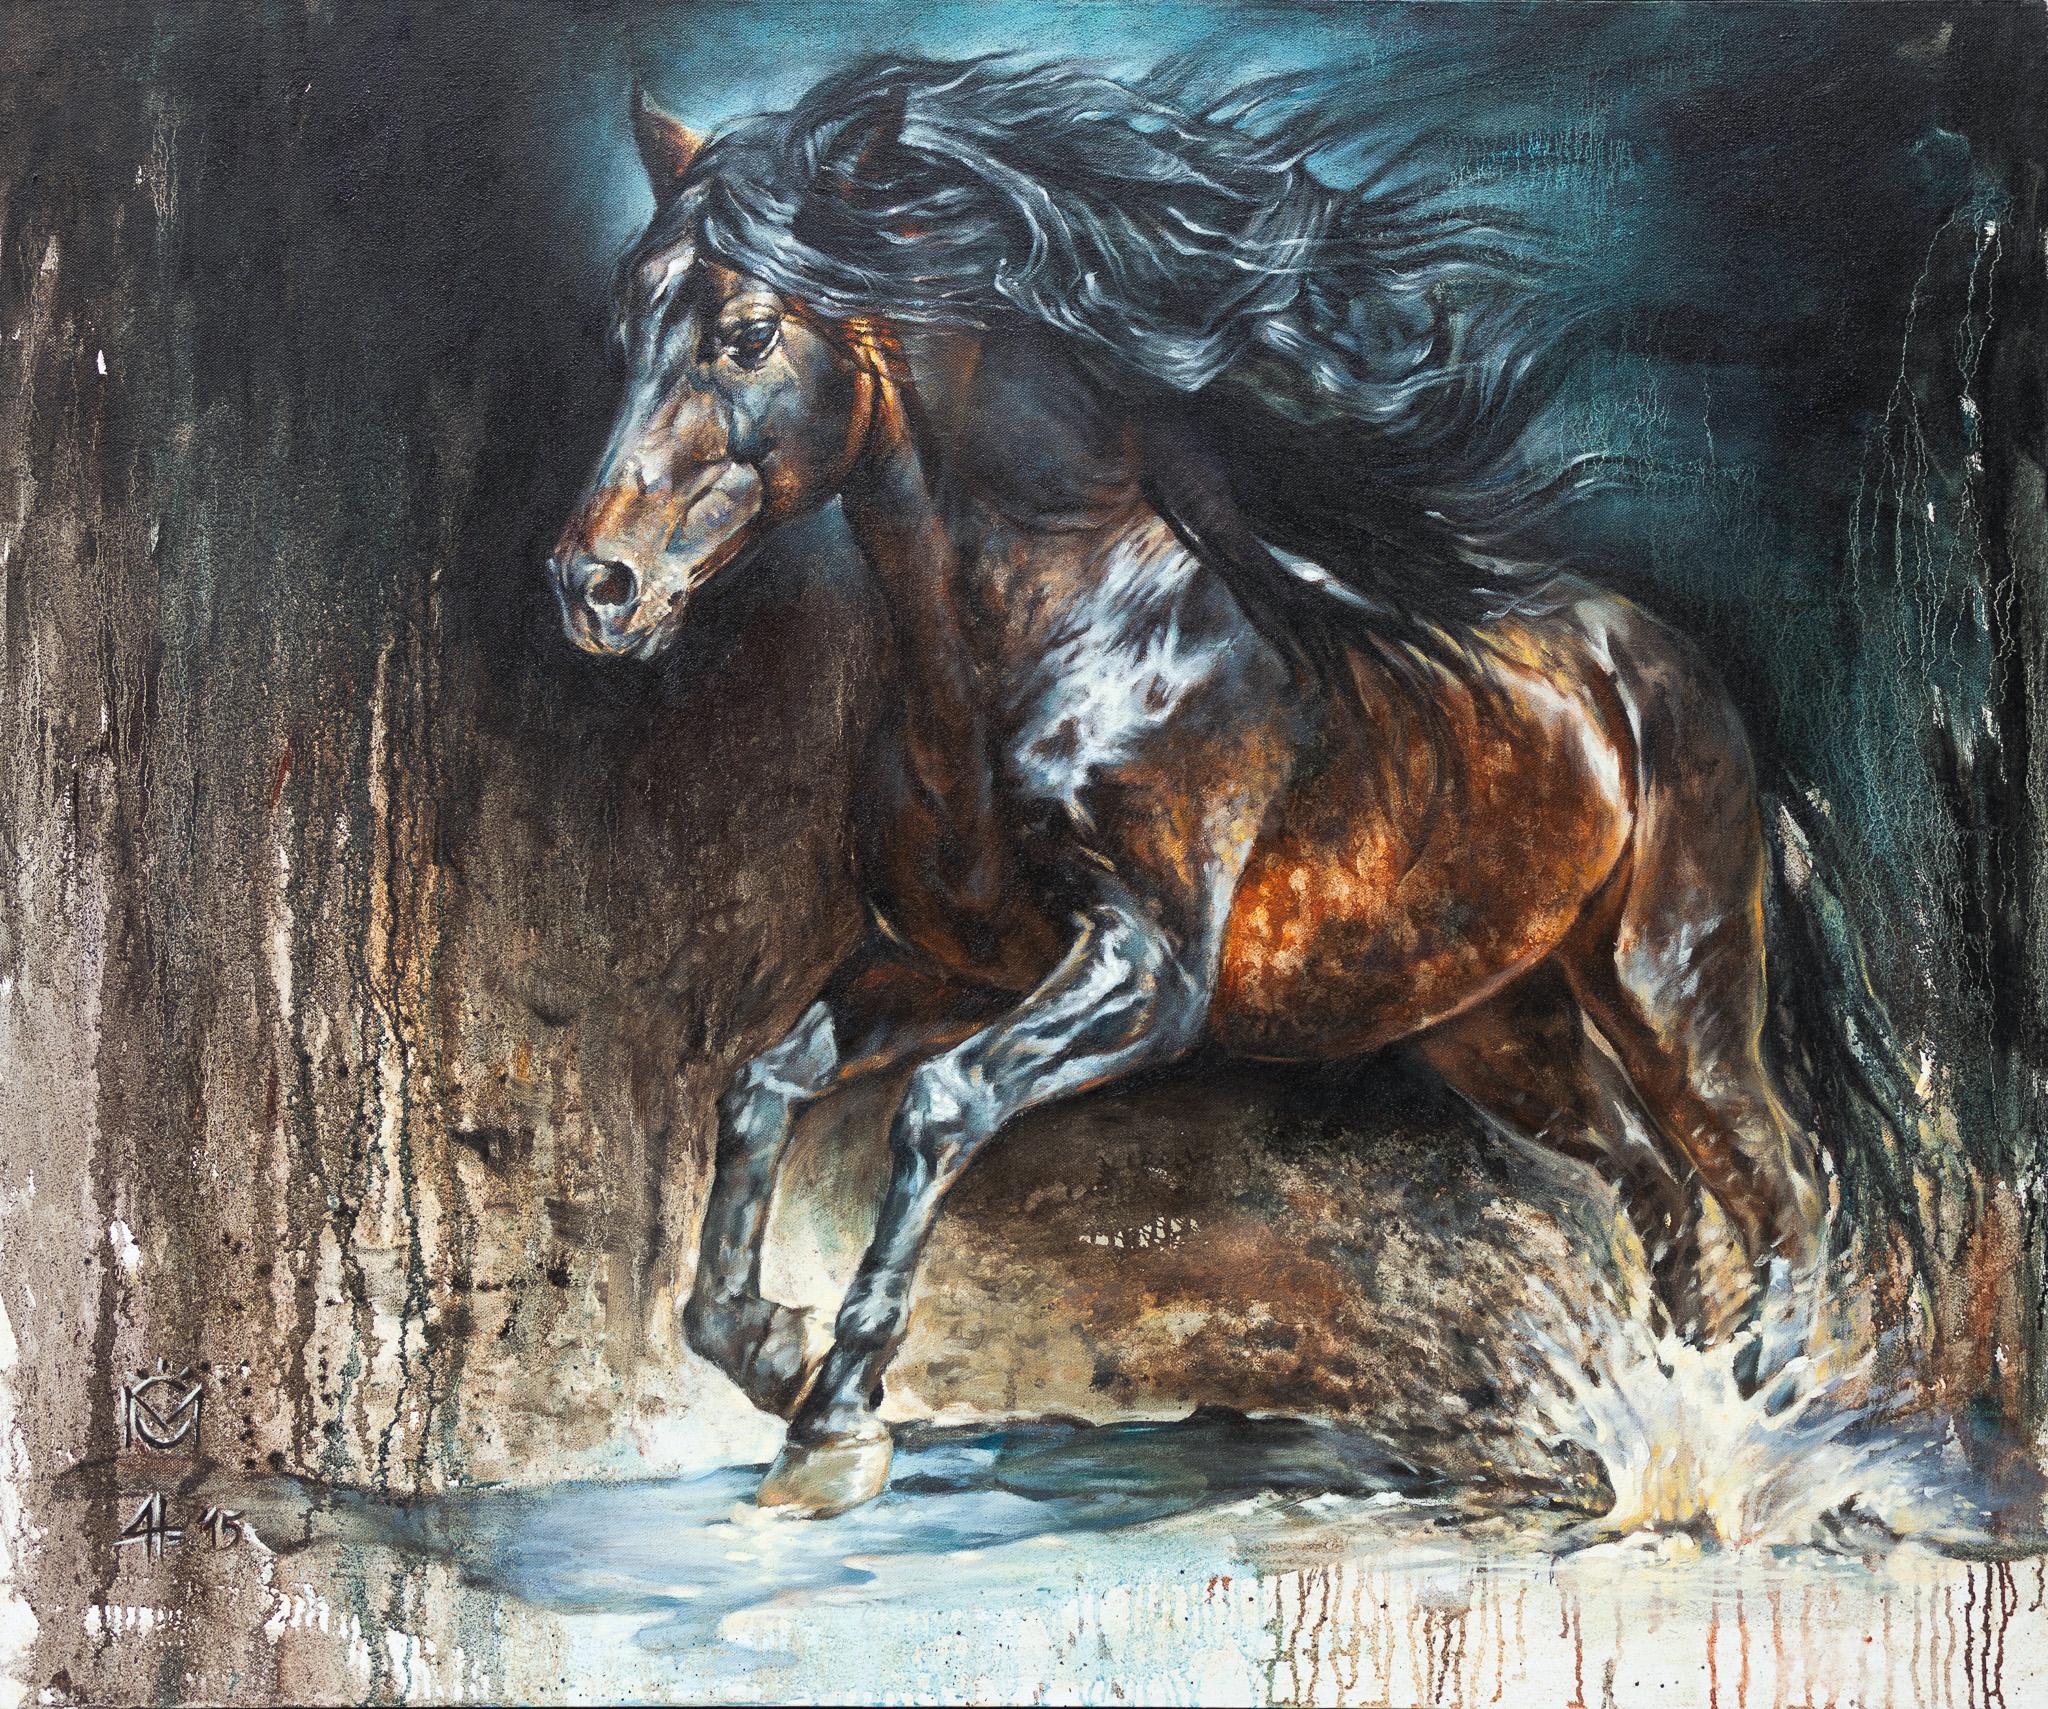 Daniela Nikolova Animal Painting - "Horse Galloping in Shallow Water" Equine Painting